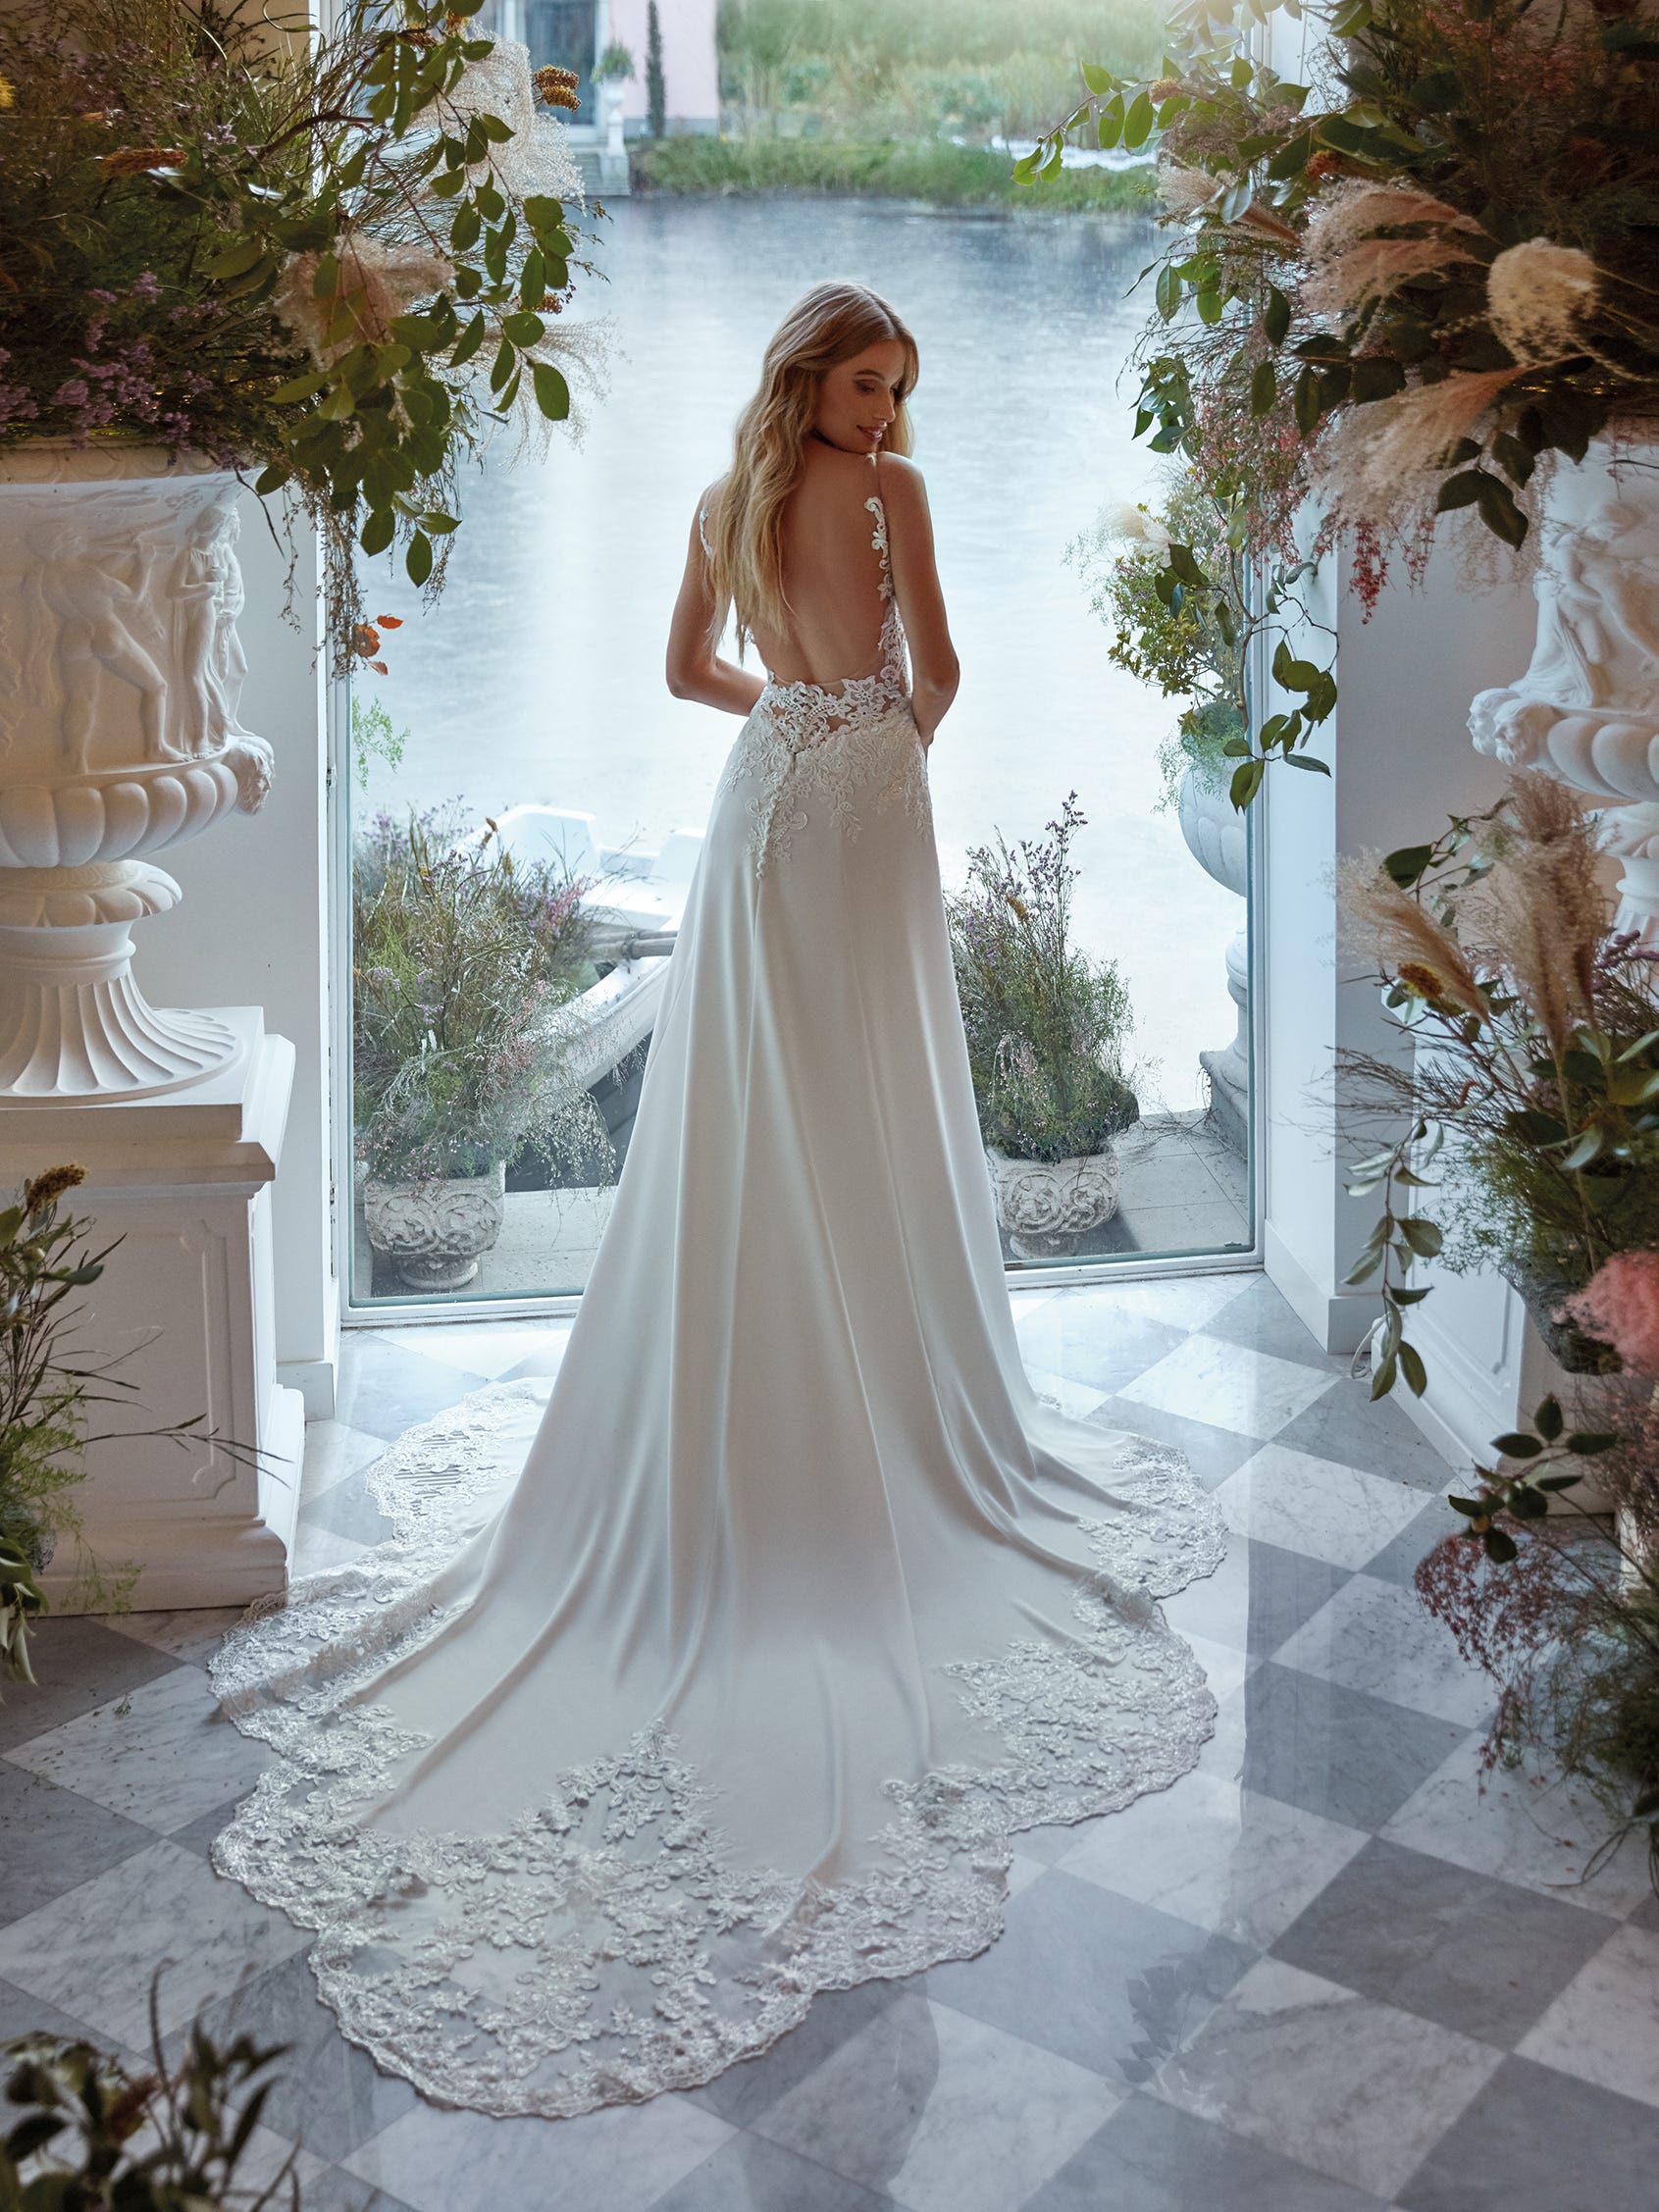 Choosing the Perfect Backless Wedding Dress for Your Bridal Style